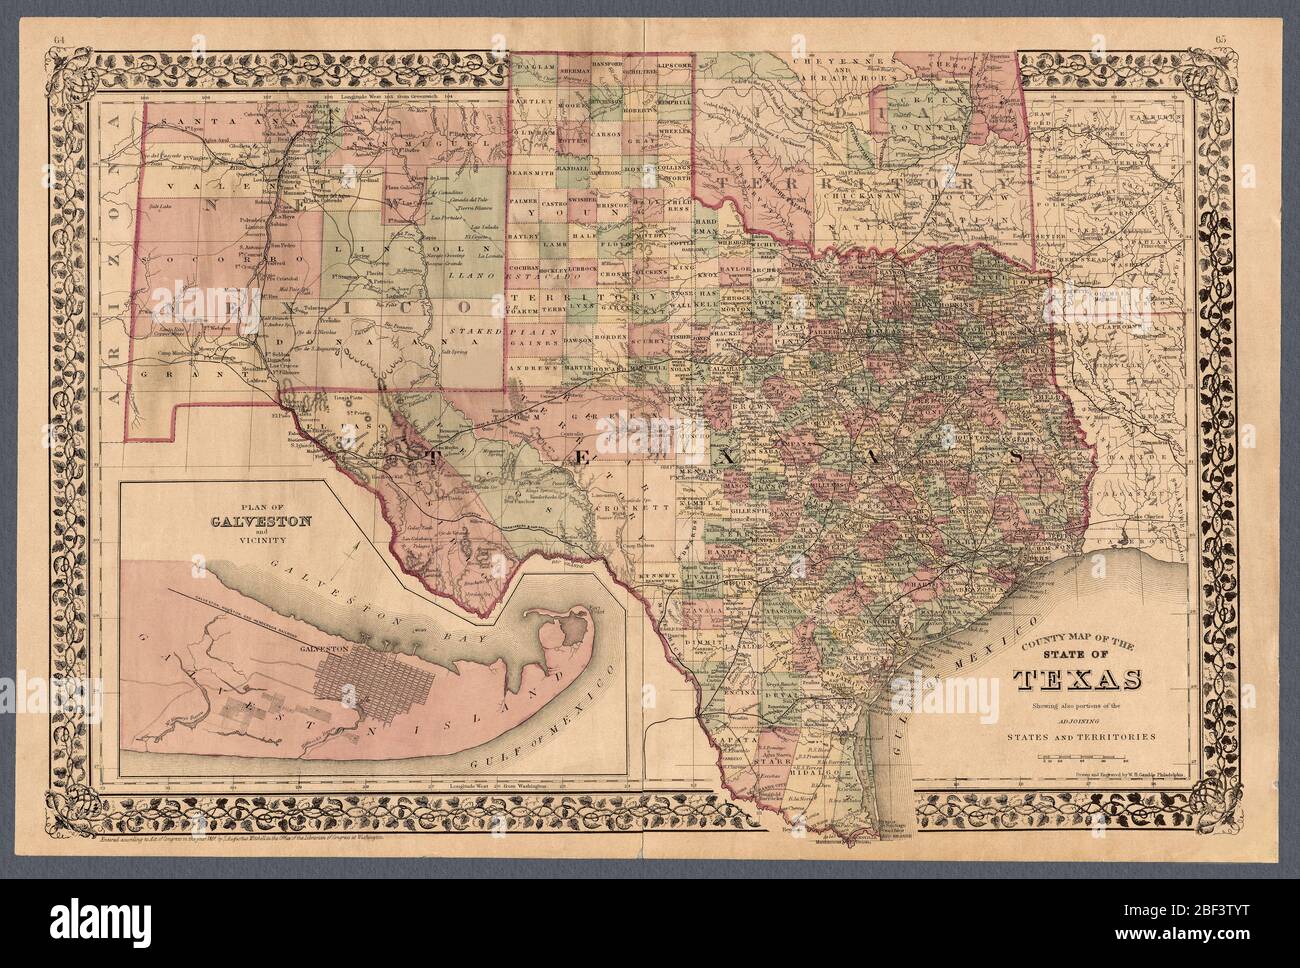 Texas Counties and adjoining areas, 1881 map, a digitally restored historic map. Stock Photo